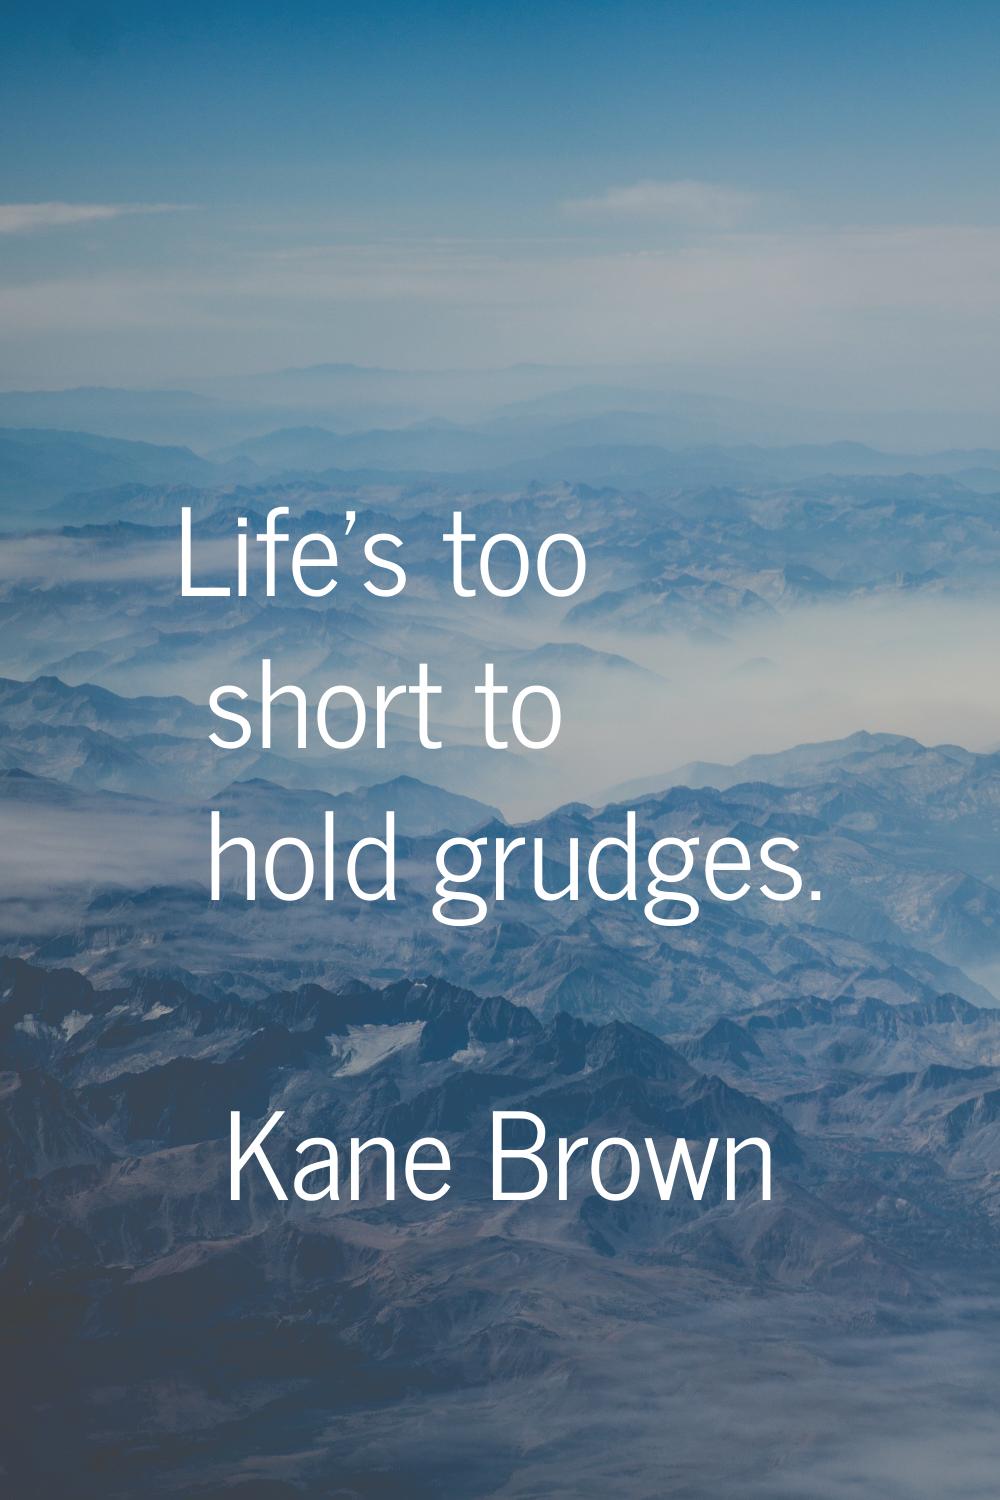 Life's too short to hold grudges.